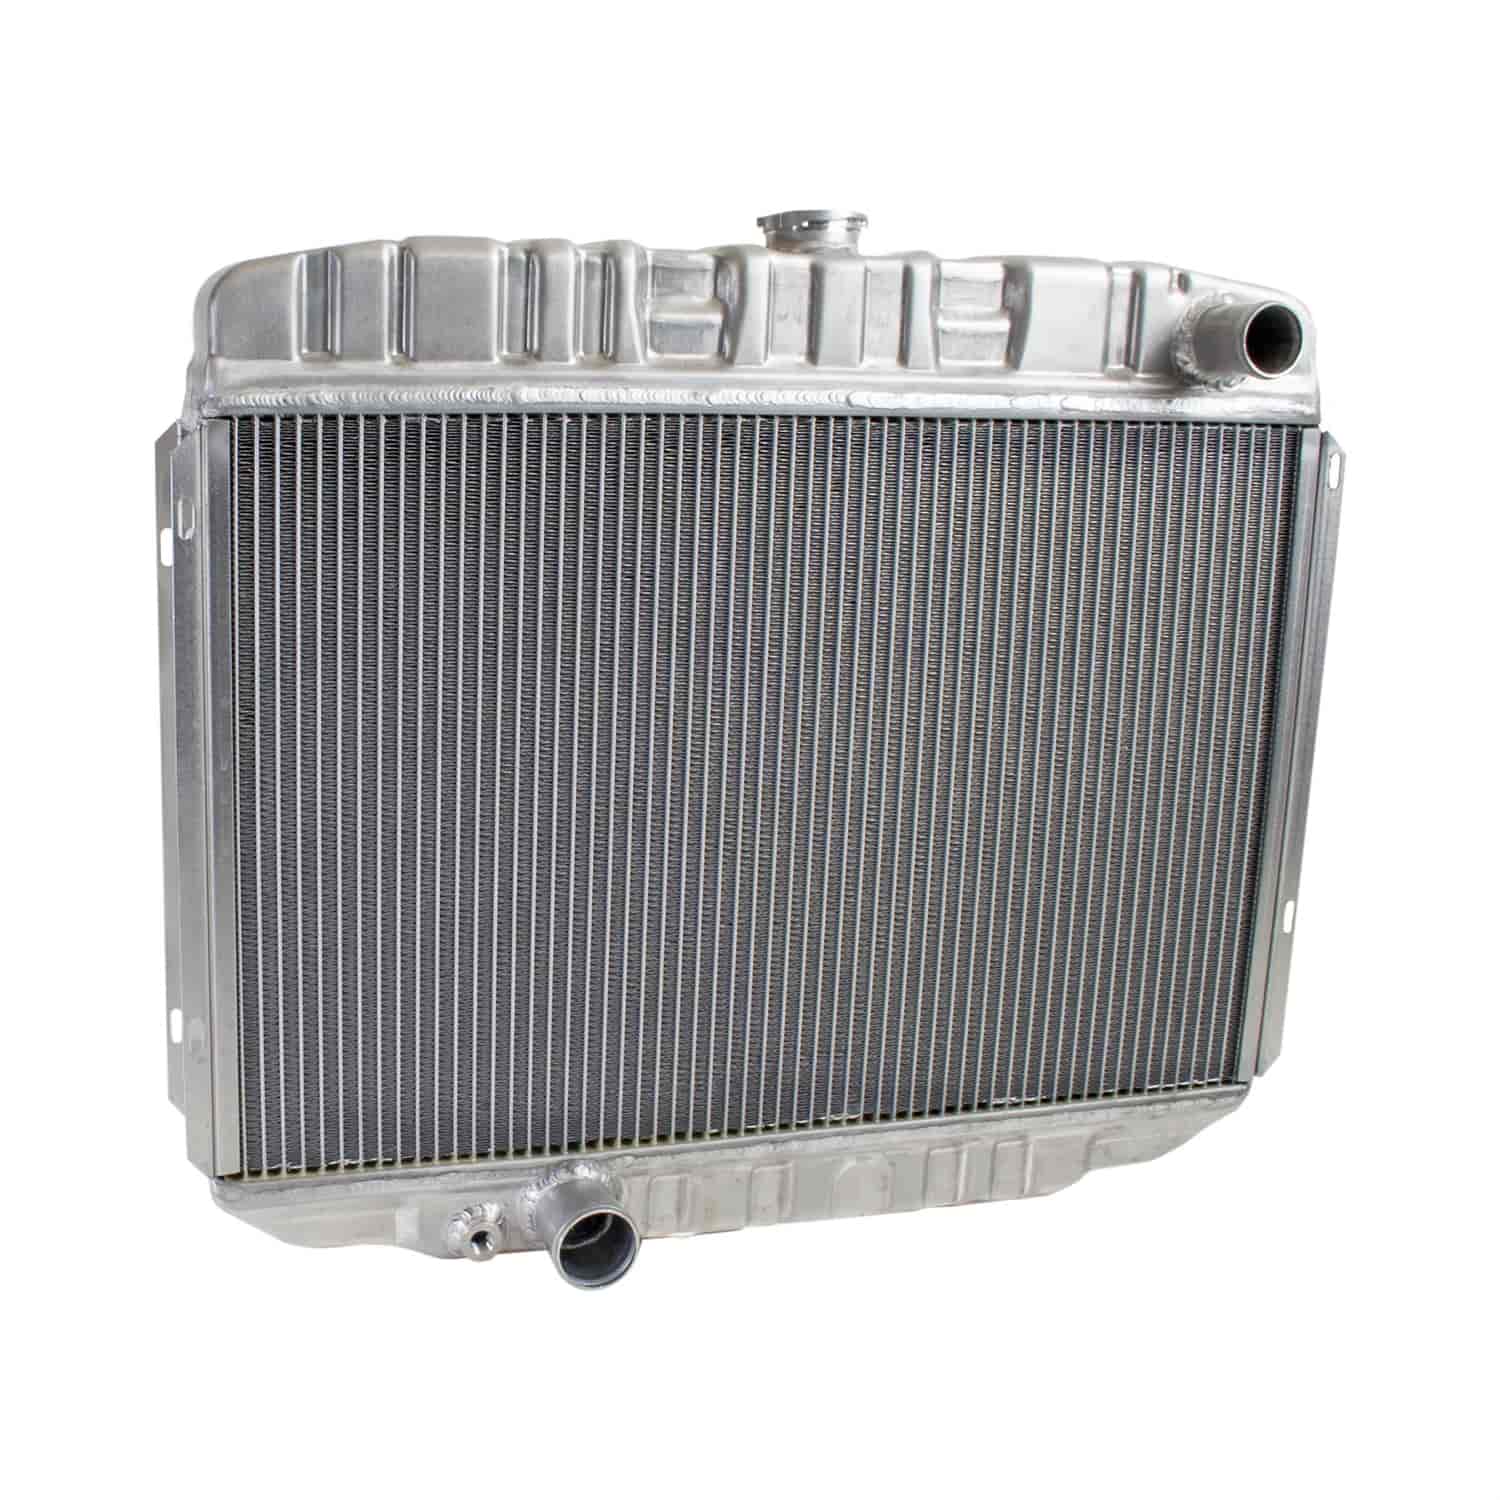 ExactFit Radiator for 1968-1970 Ford Mustang/Mercury Cougar with Big Block & Late Small Block